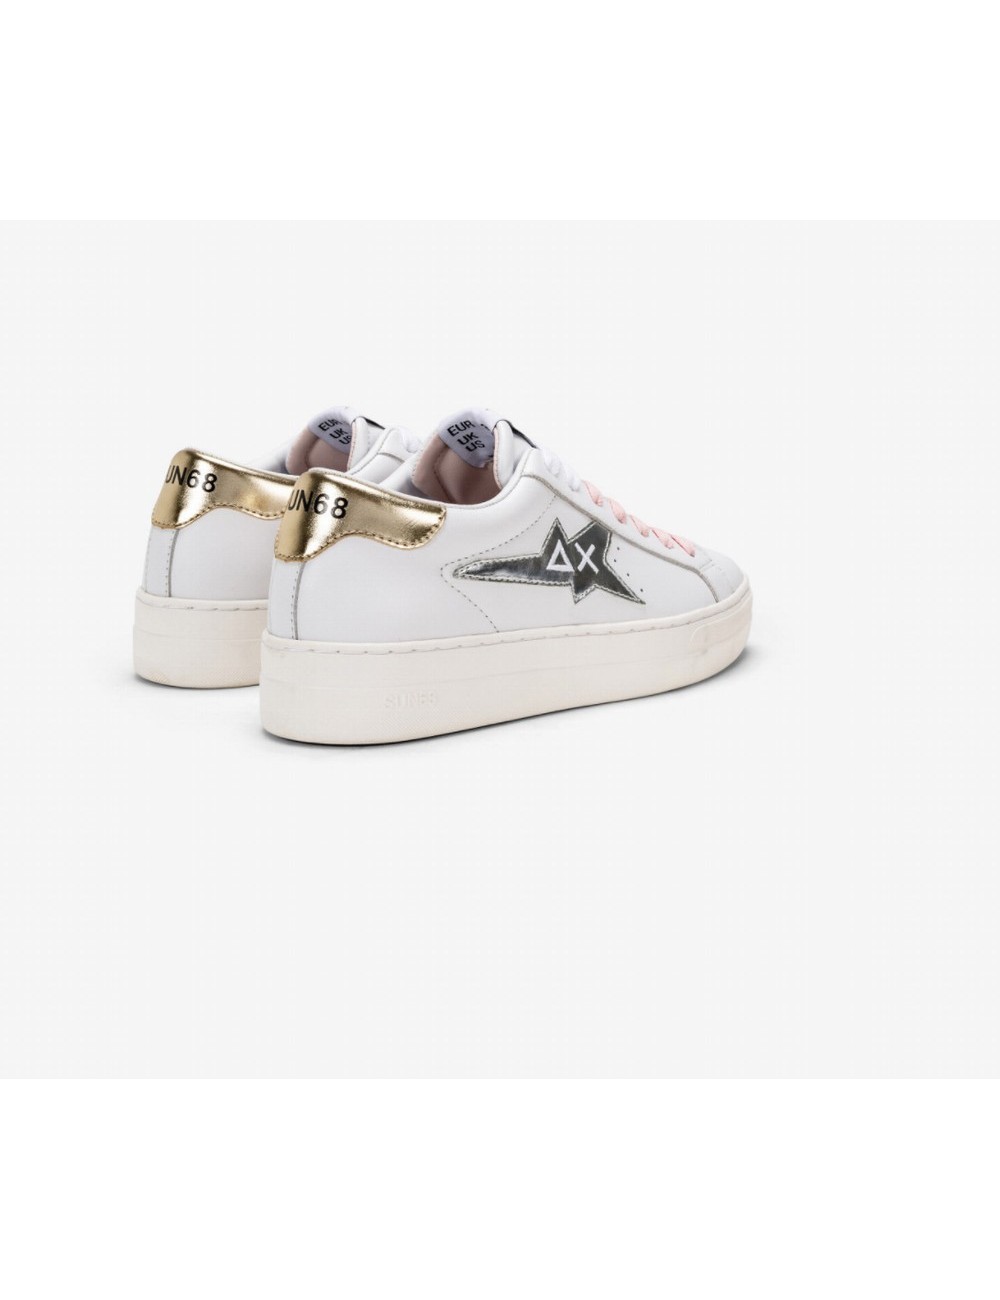 WOMEN'S SNEAKERS SUN 68 BETTY WHITE AND GOLD